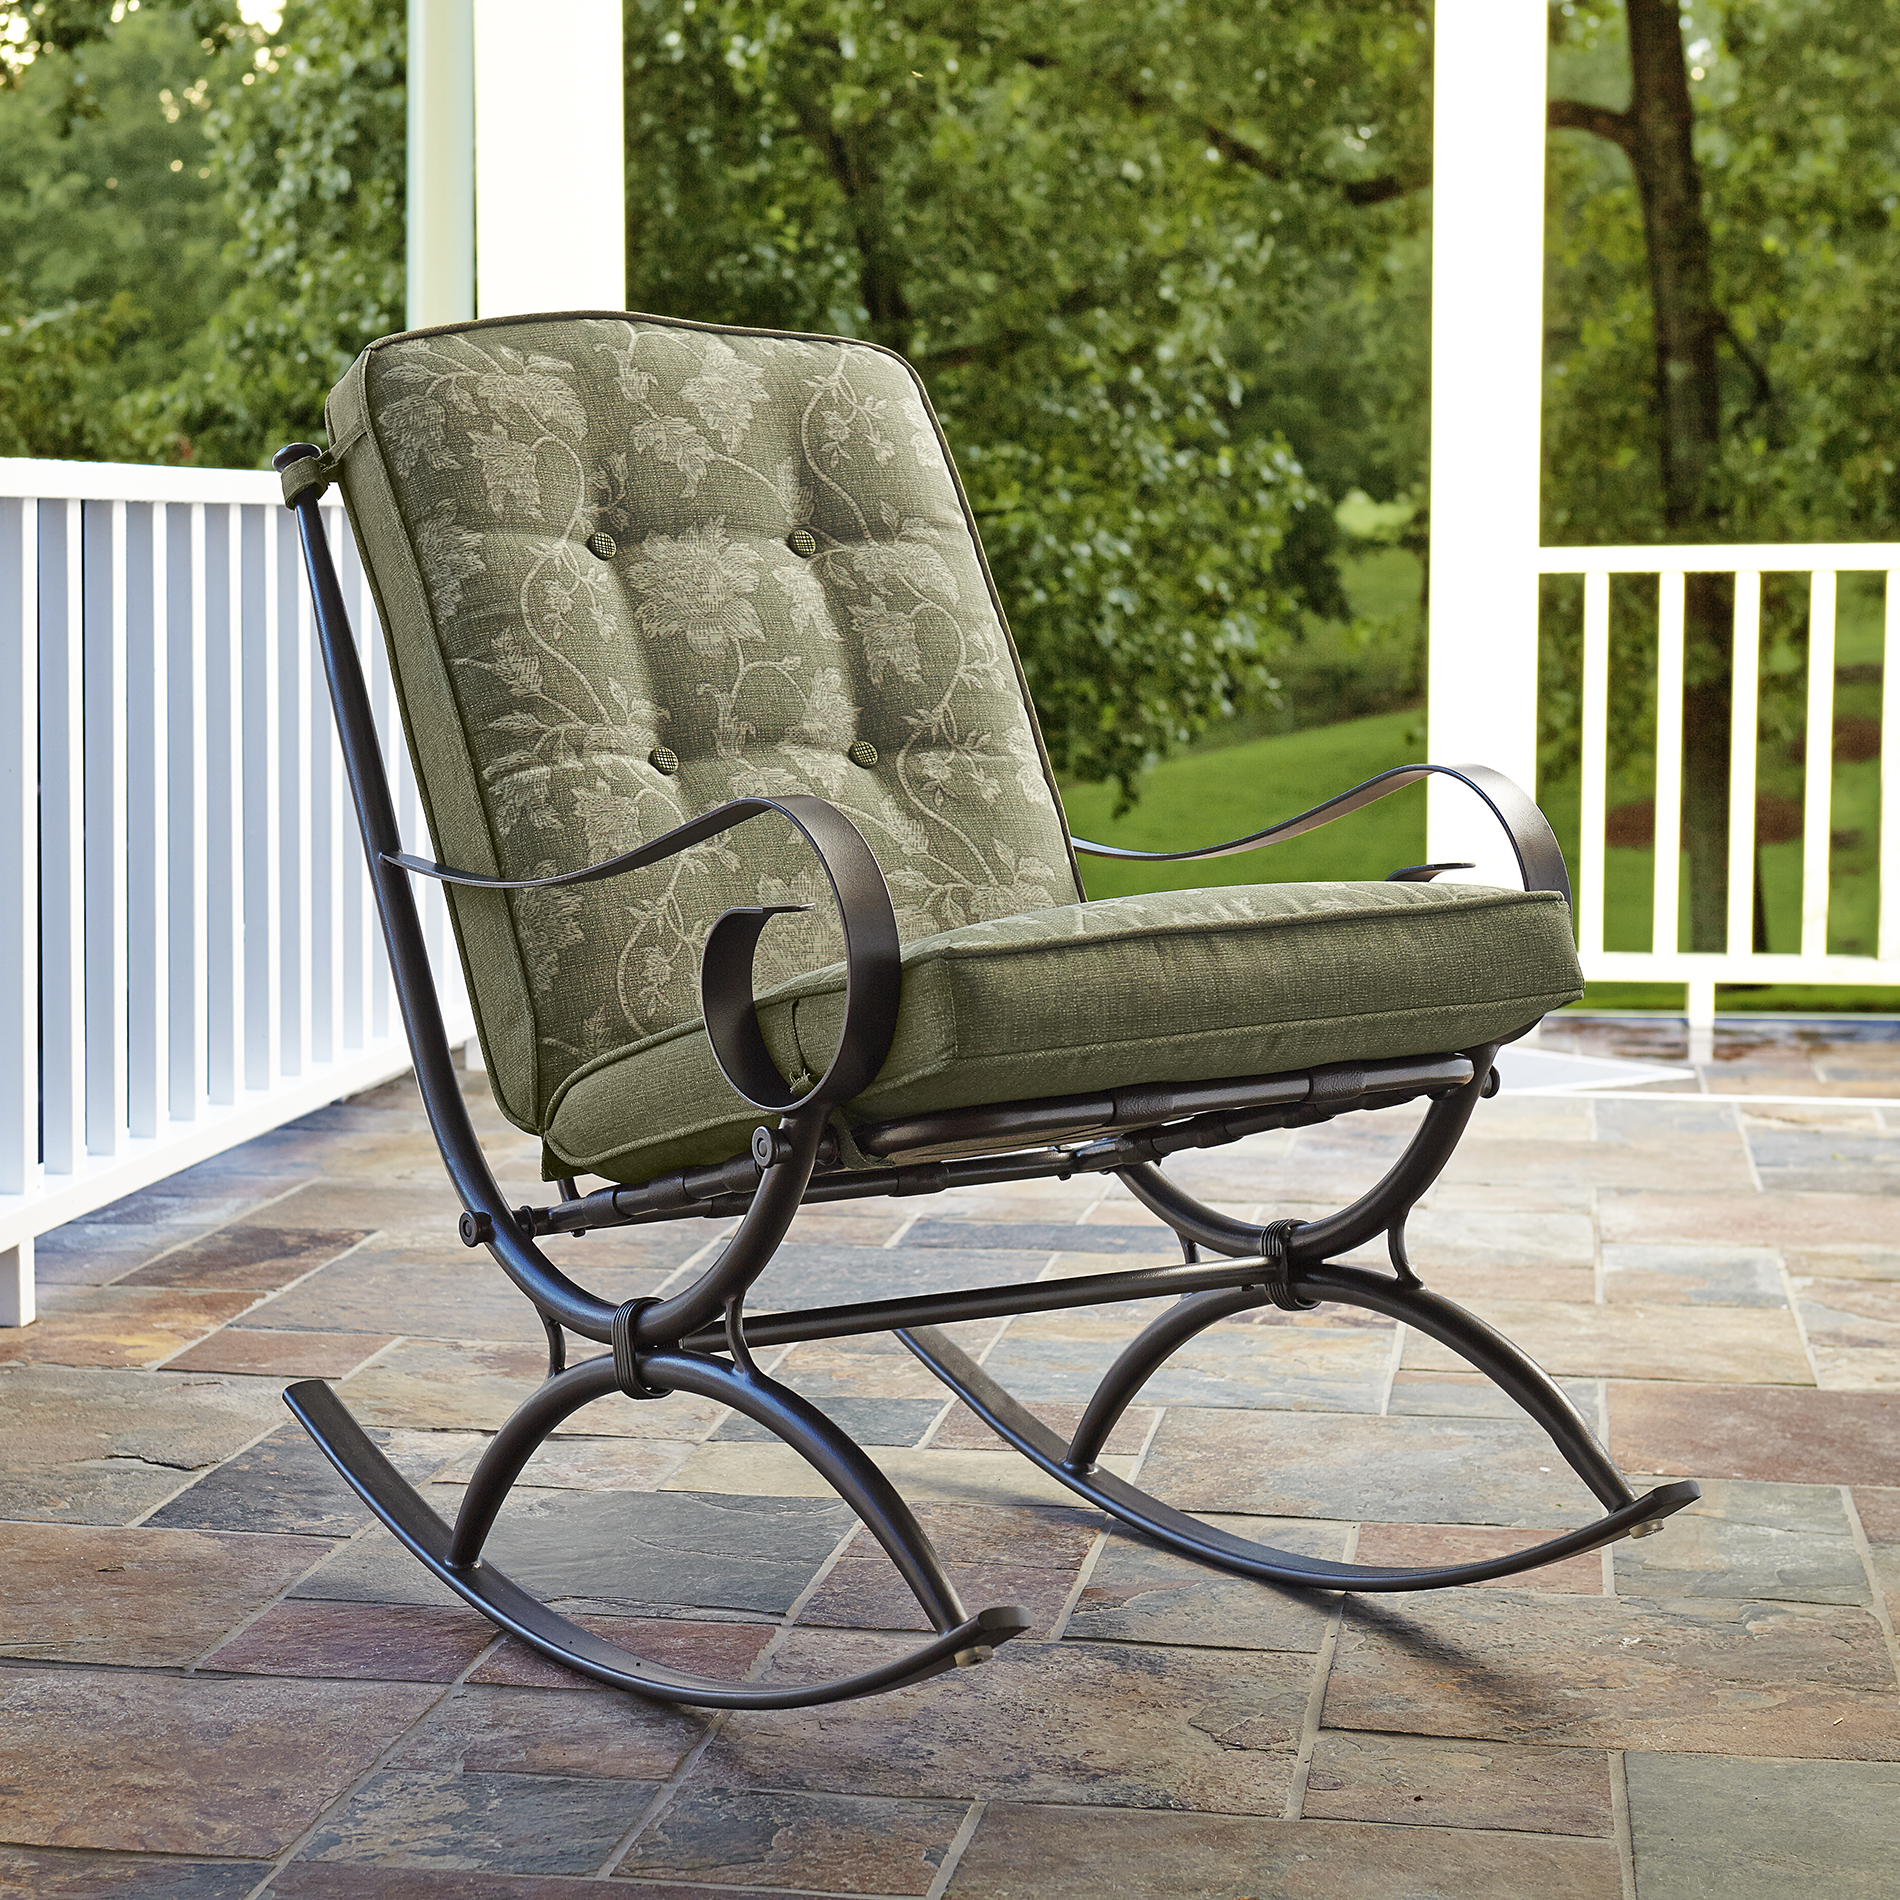 Jaclyn Smith Cora Single Rocking Chair Green Outdoor